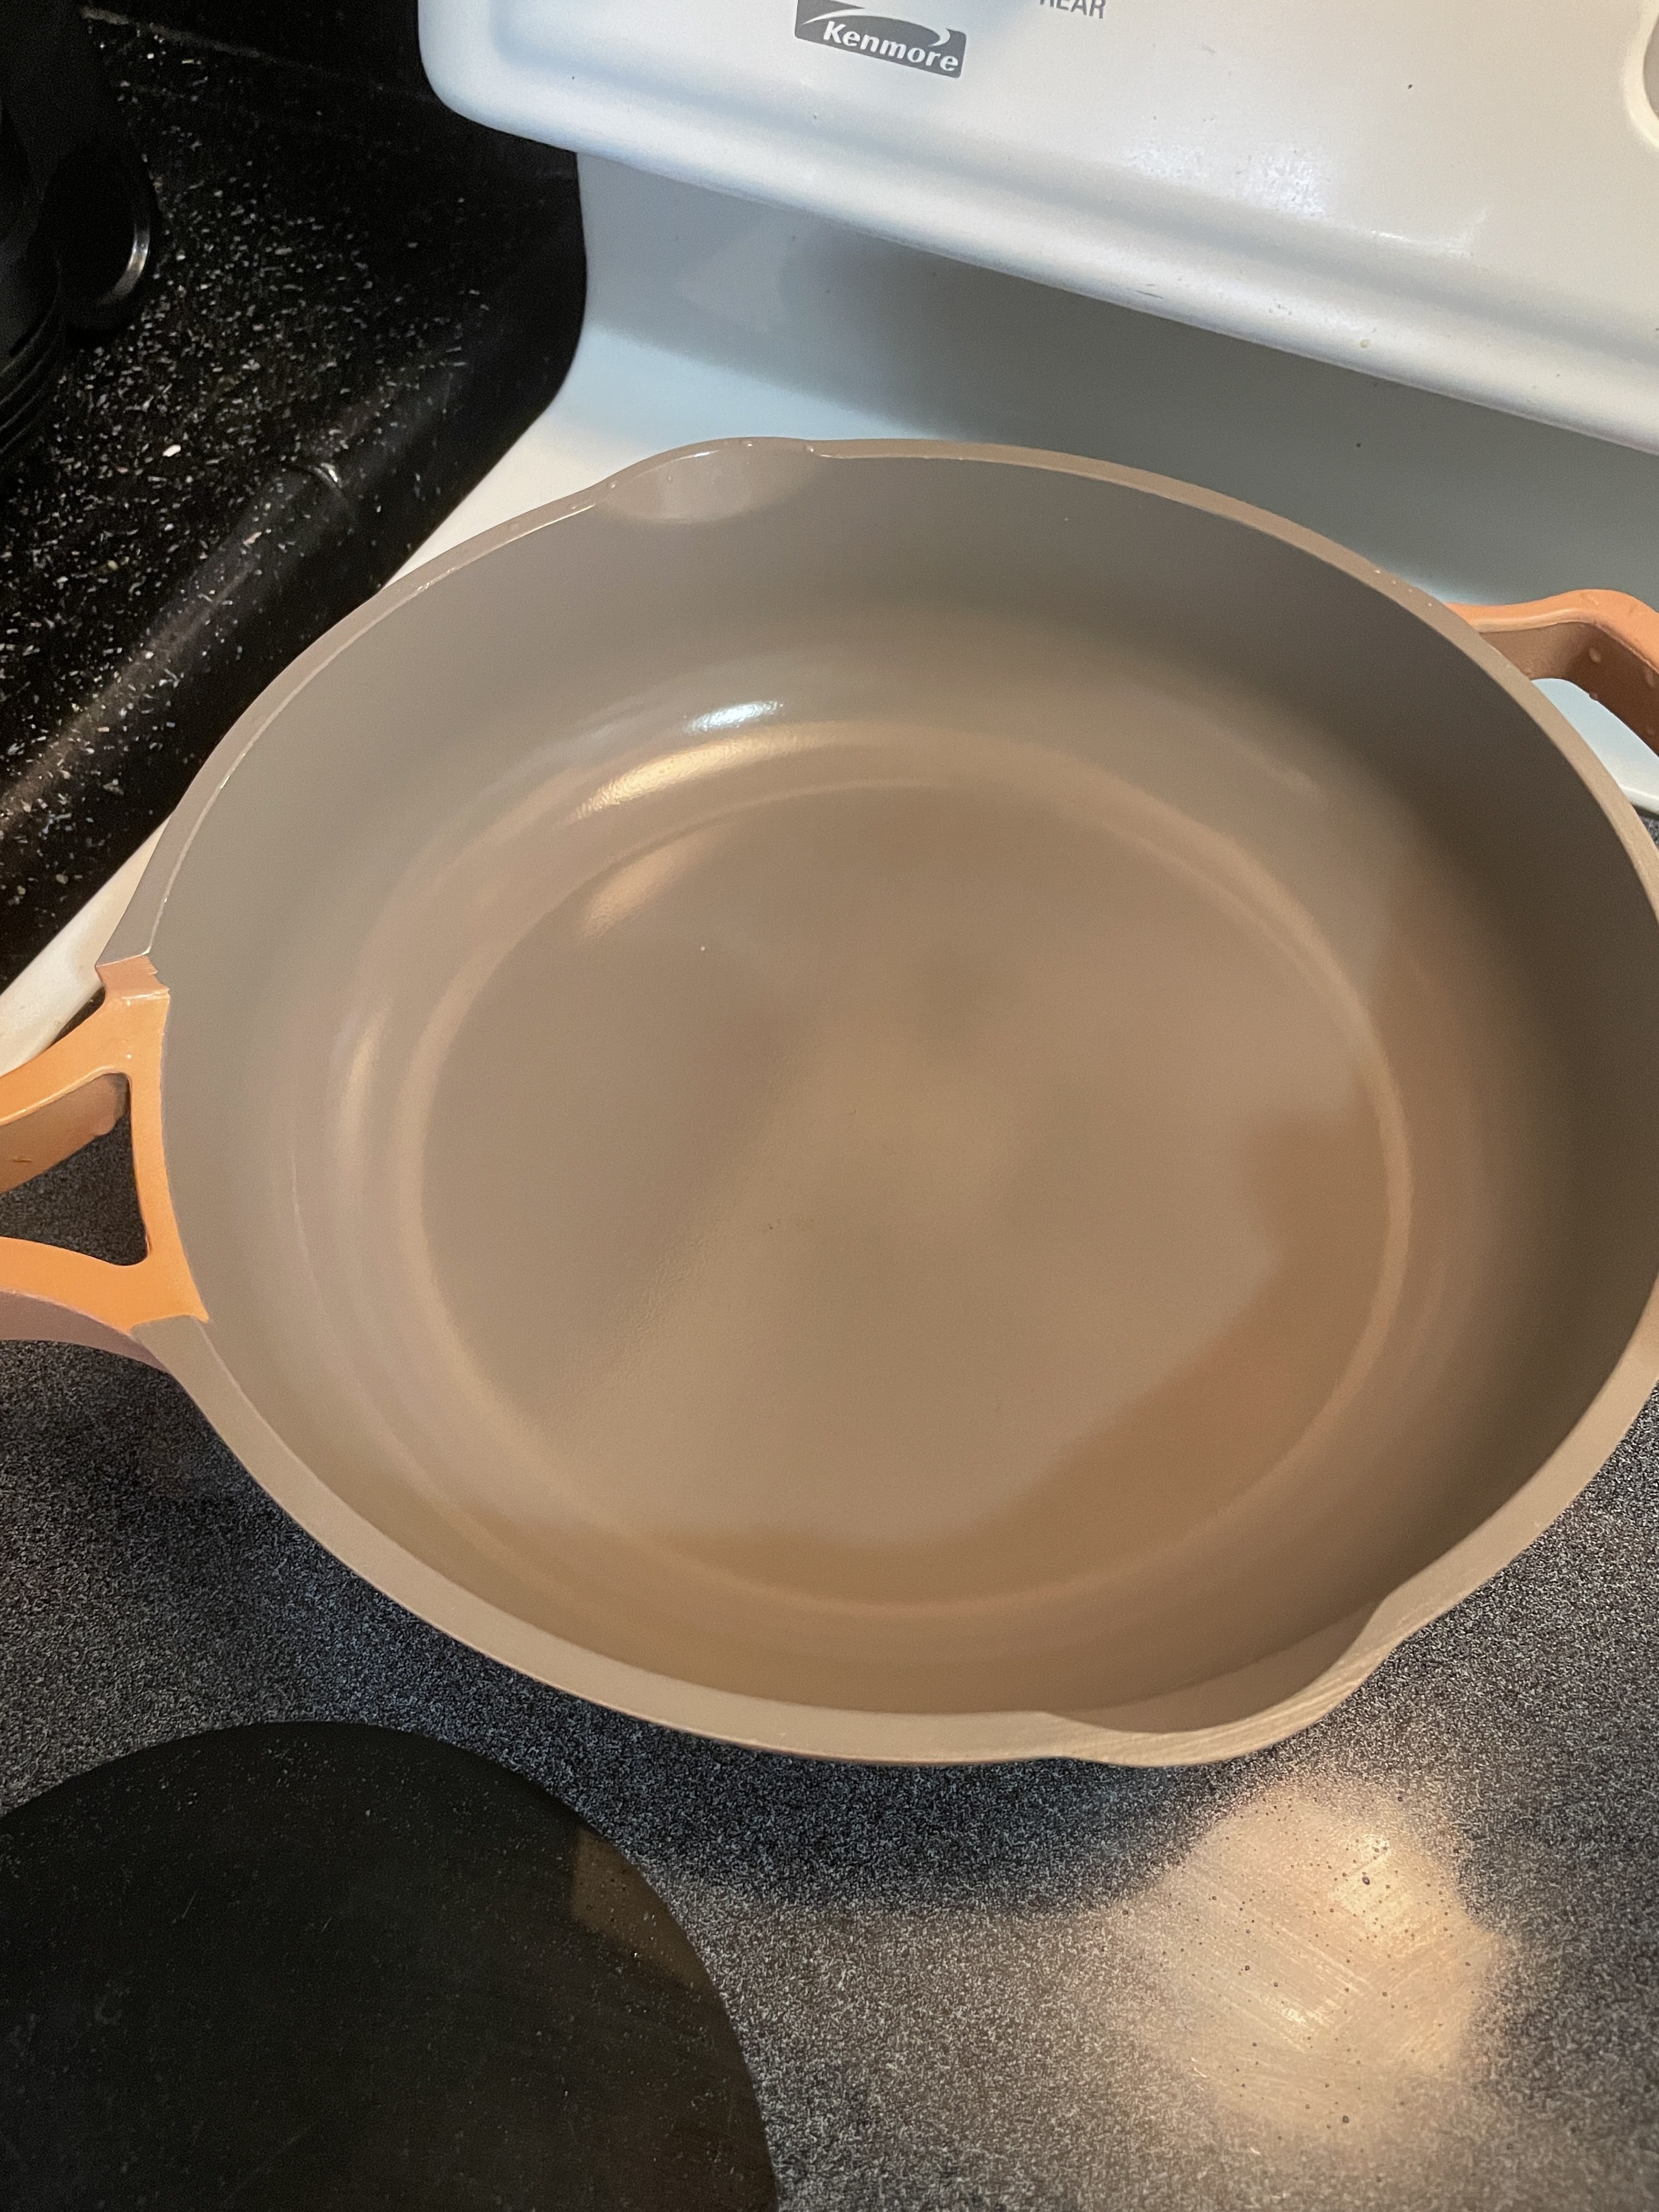 Pan looking smooth and clean, no browning